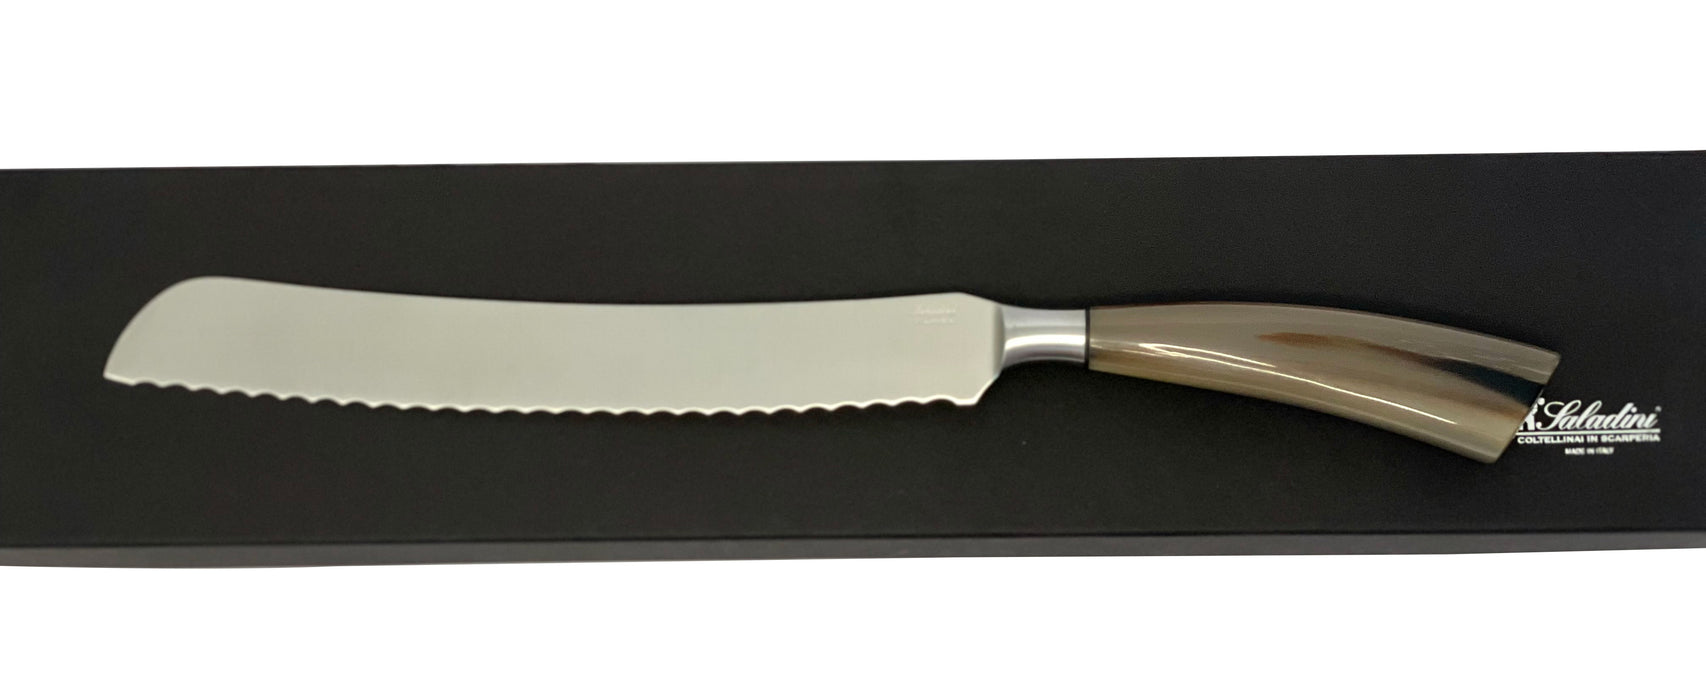 Coltelleria Saladini Stainless Steel Bread Knife with Ox Horn Handle, 9.25-Inch